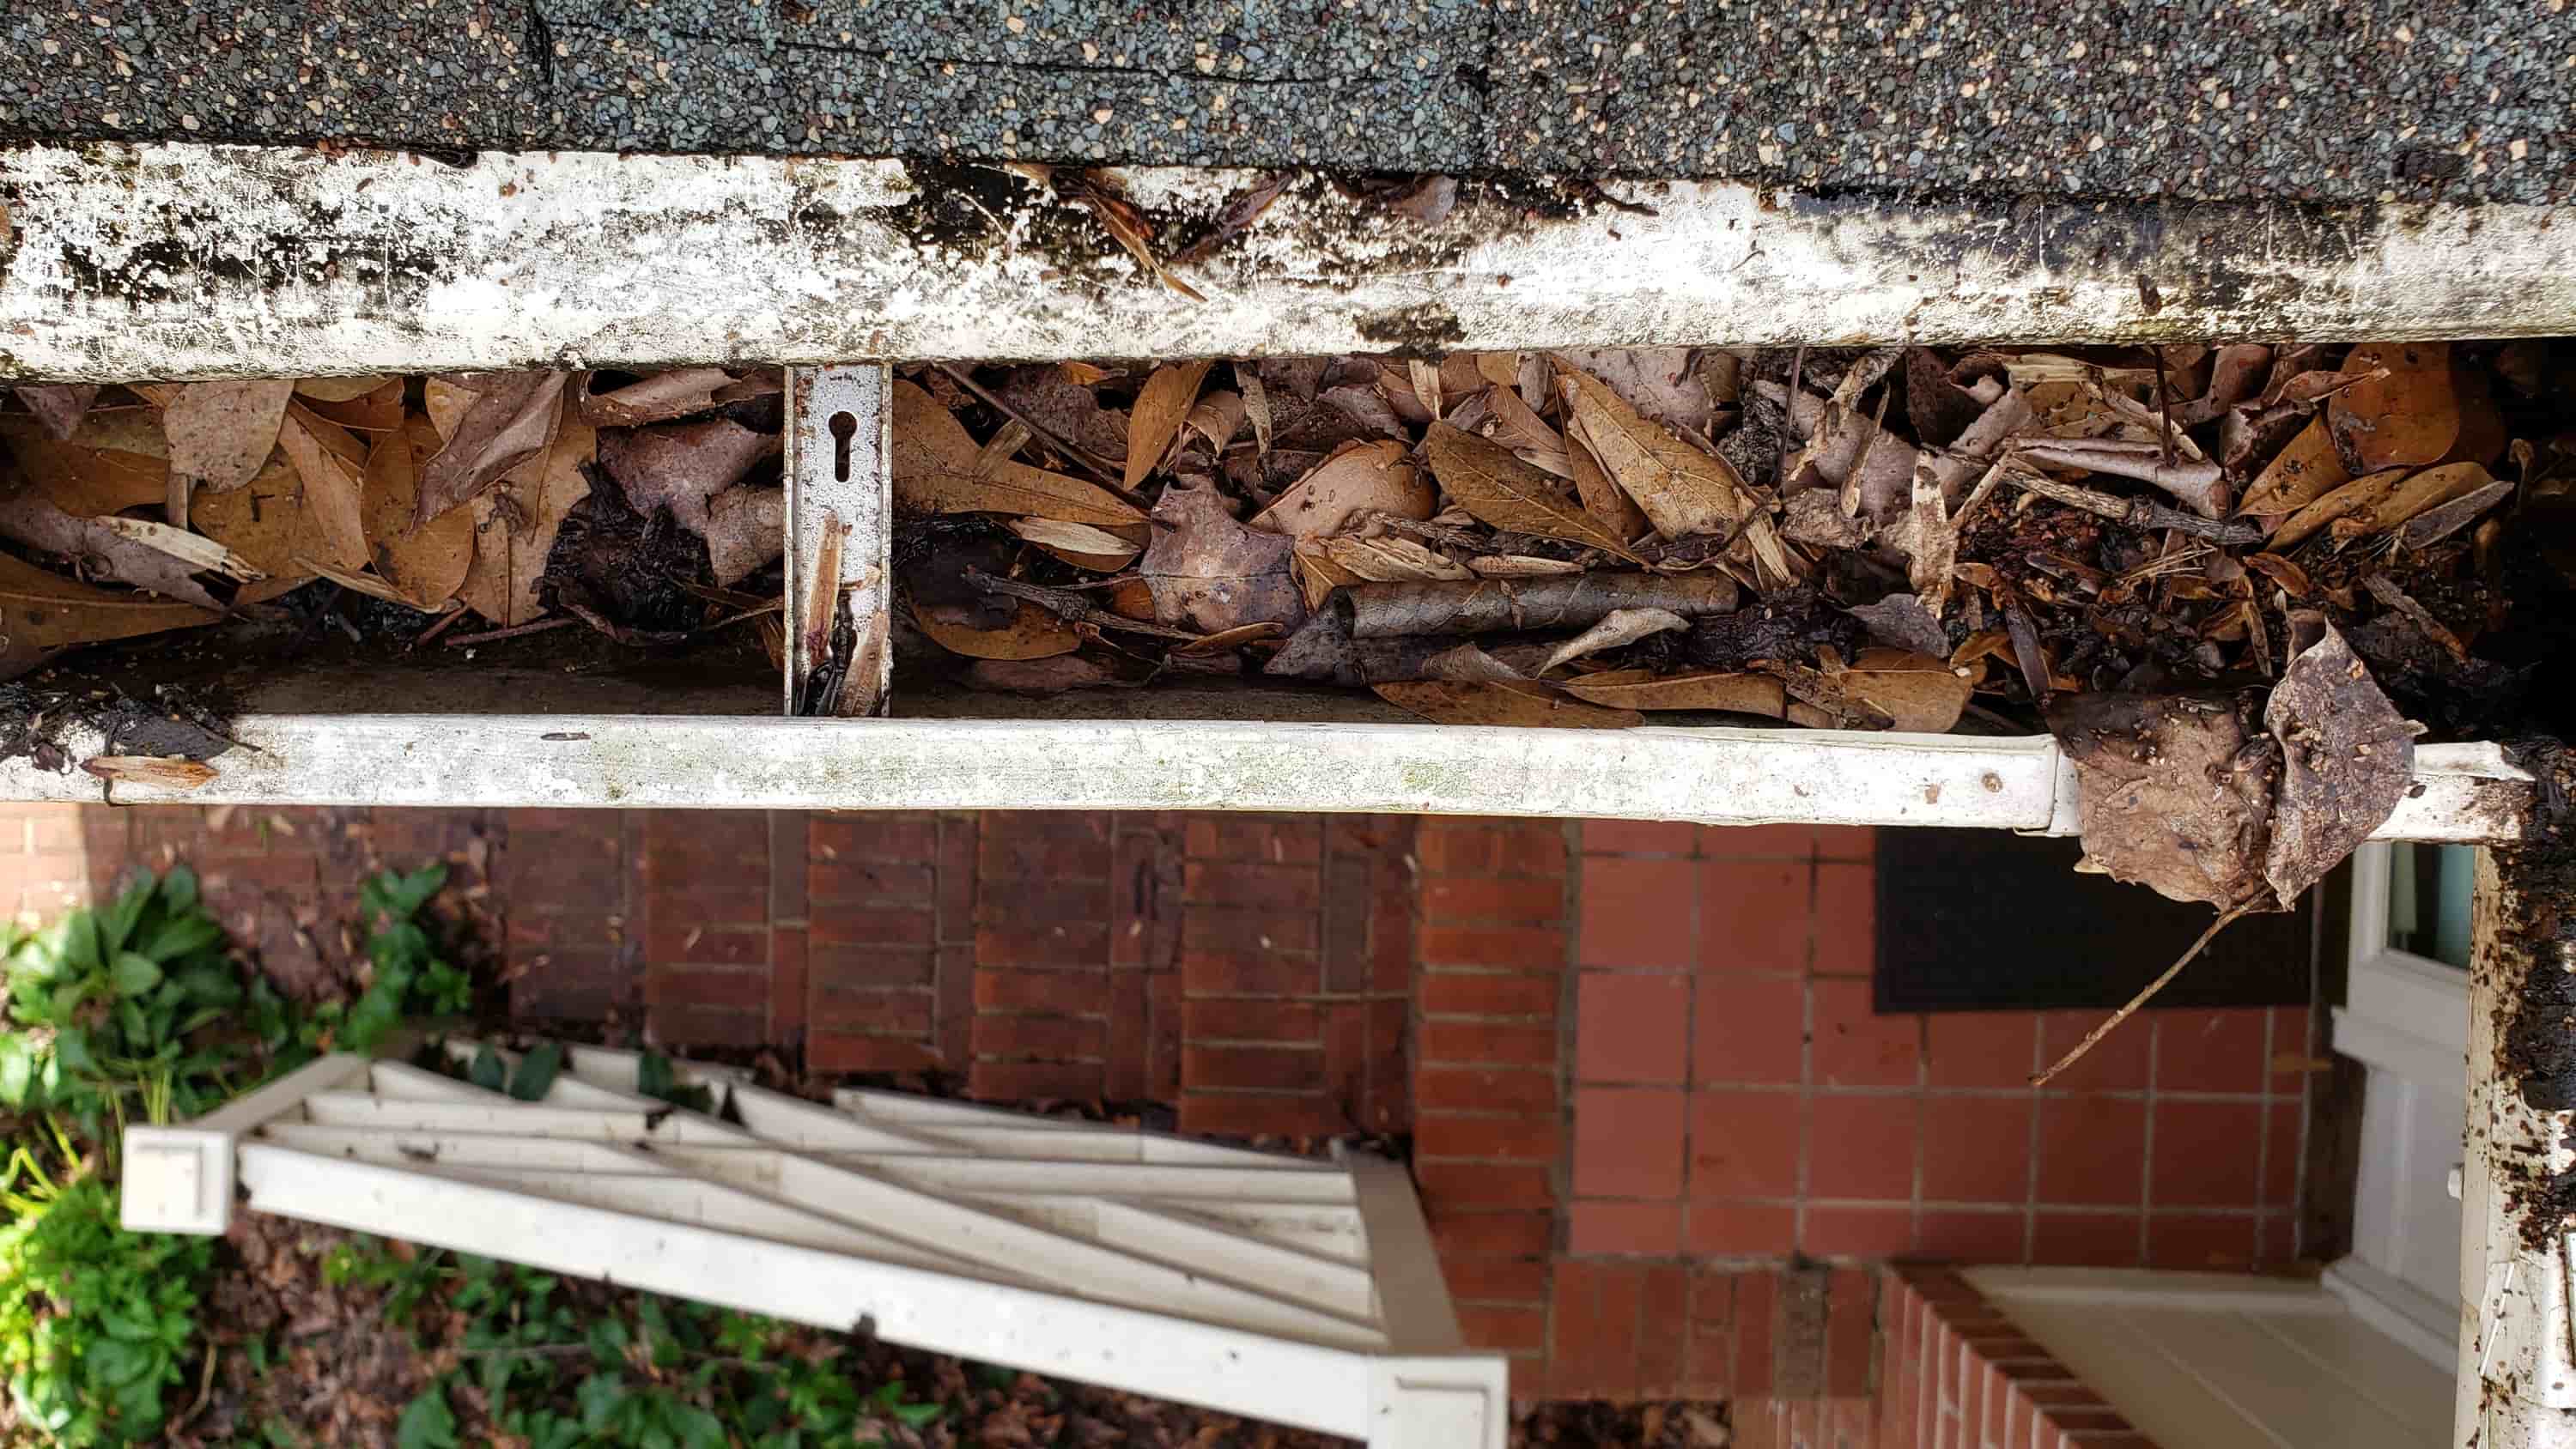 downspout cleaning service